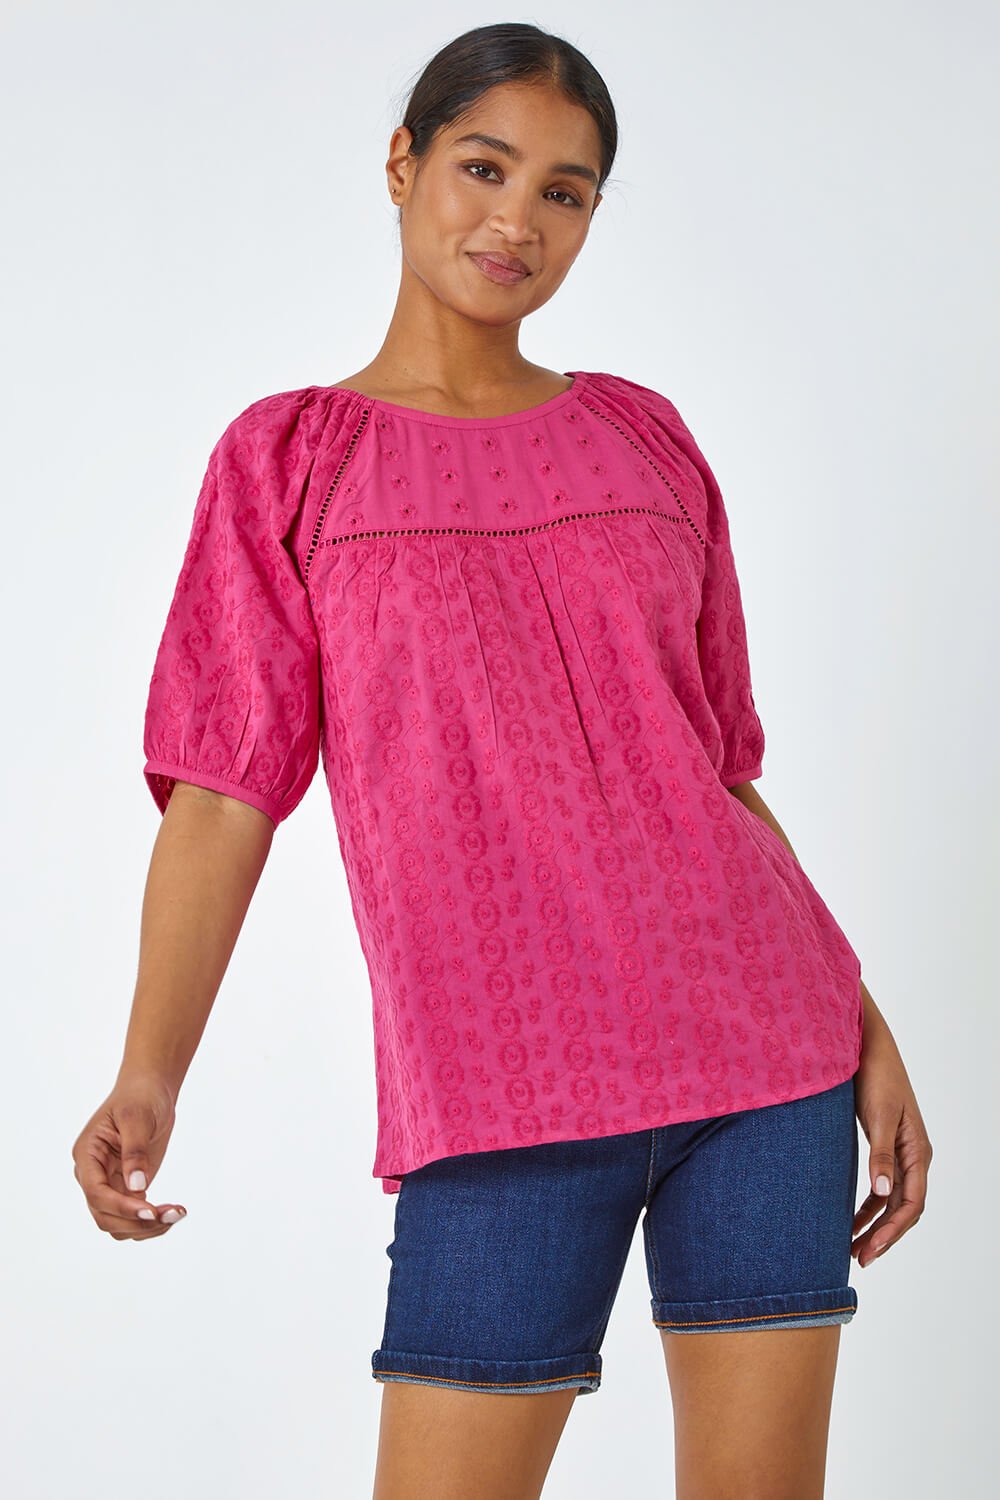 PINK Broderie Puff Sleeve Cotton Top, Image 2 of 5